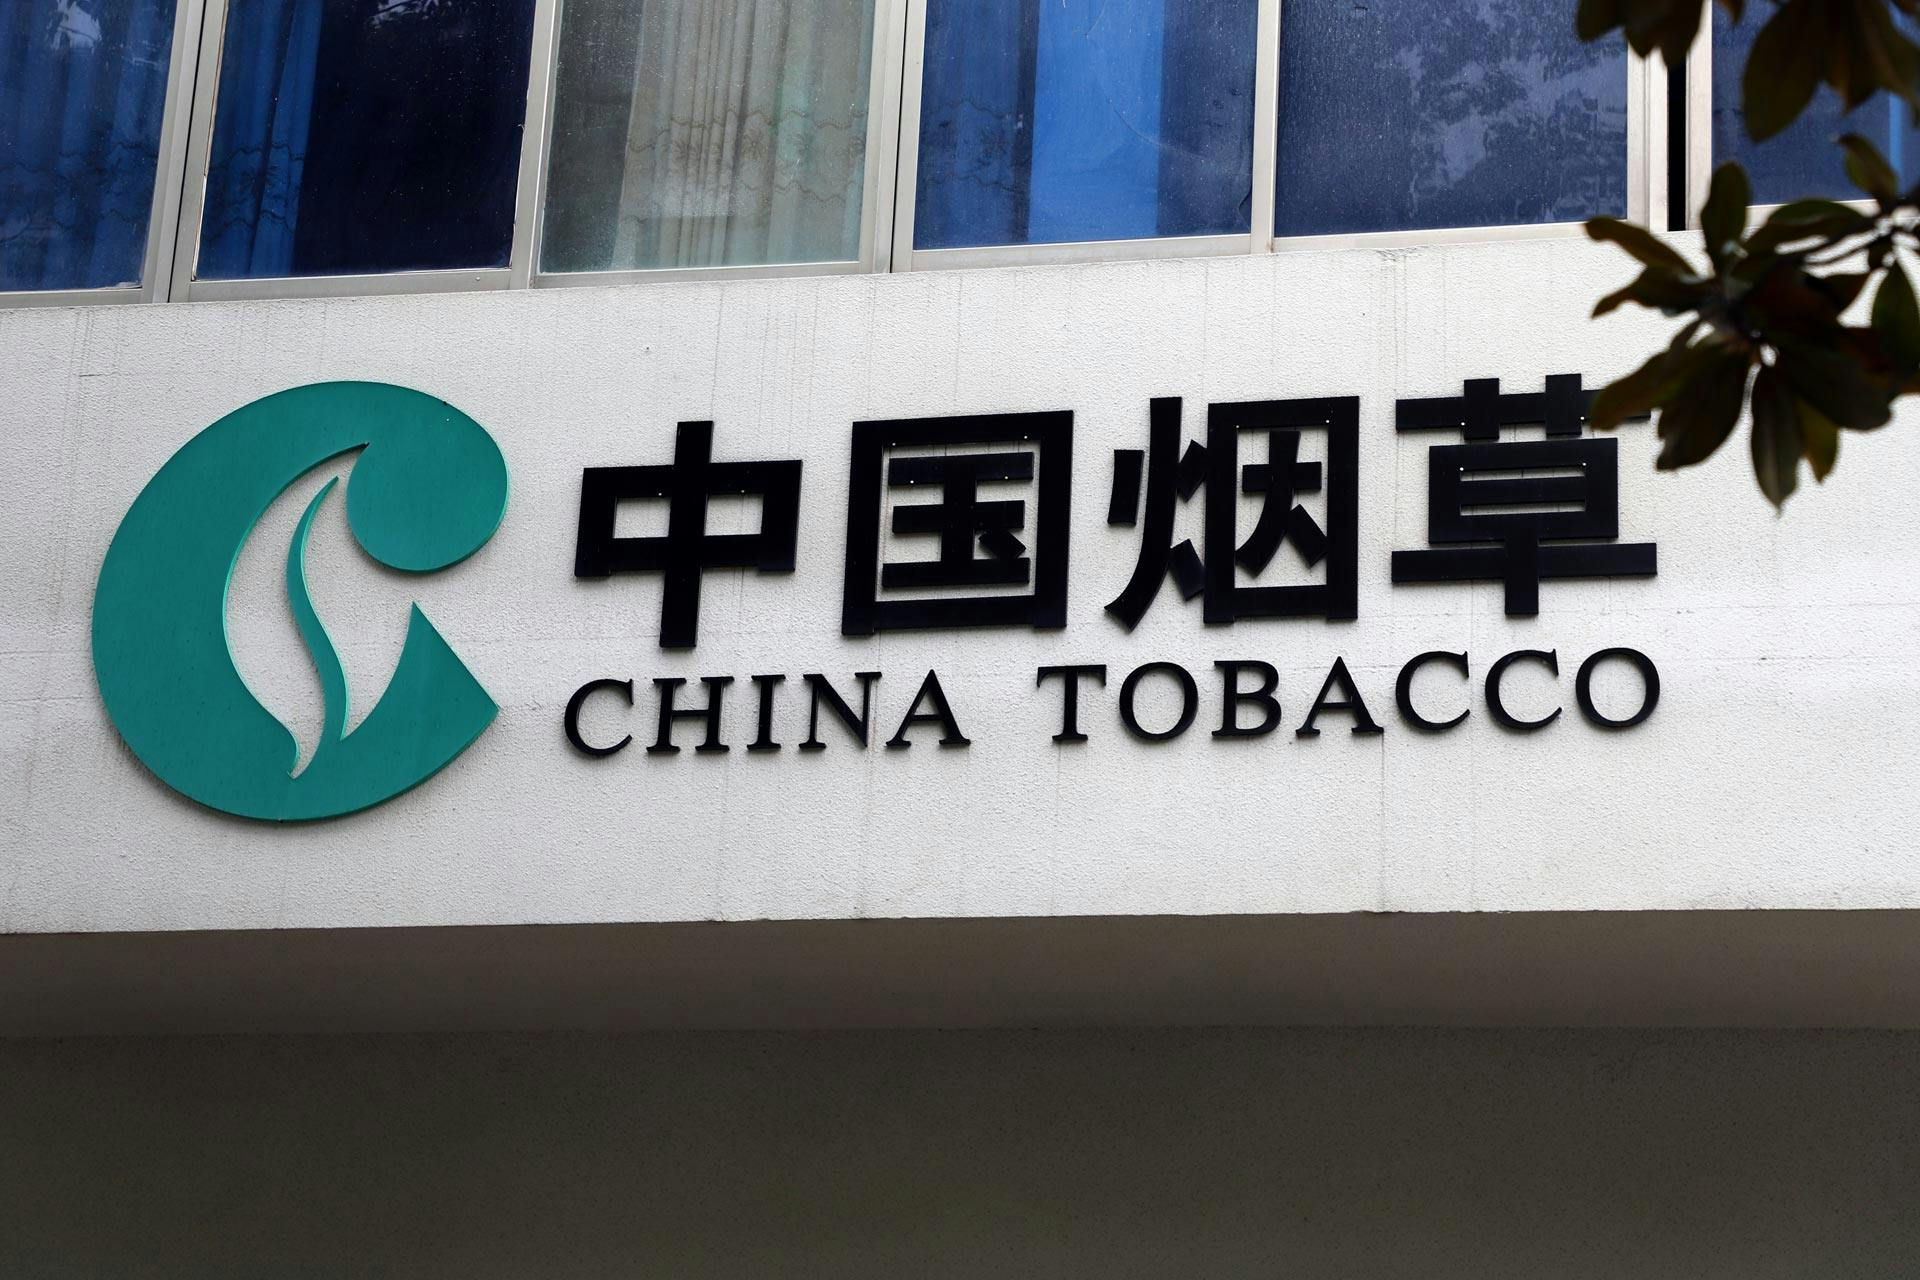 The China tobacco logo on a shop in Yichang, Hubei province, China